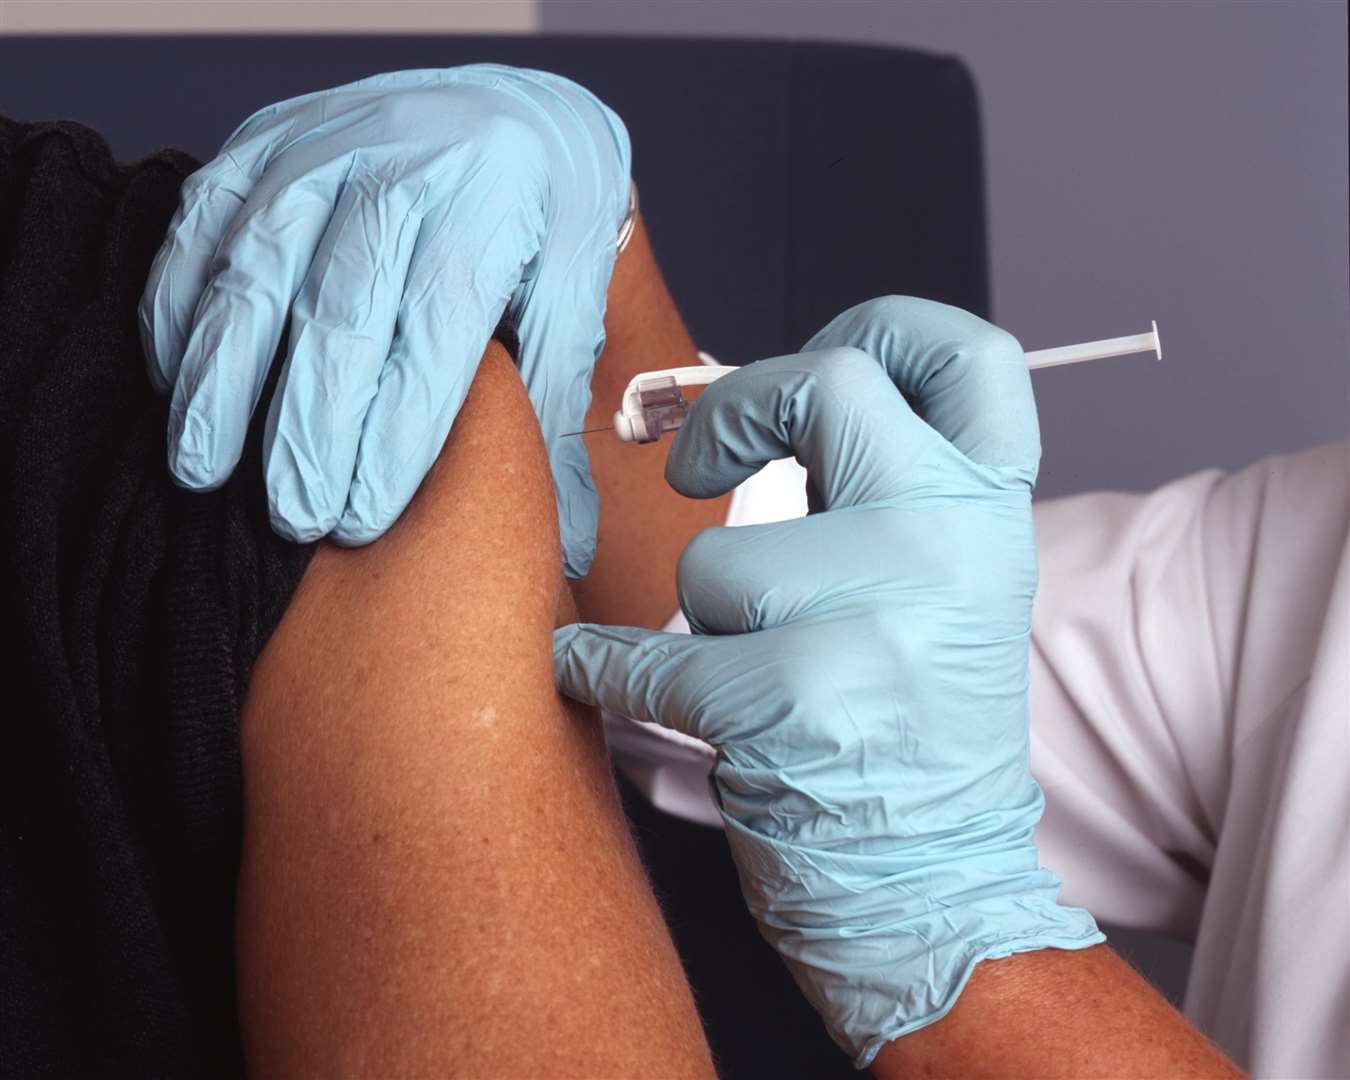 The Vaccine could be available by the end of the year. Stock image.